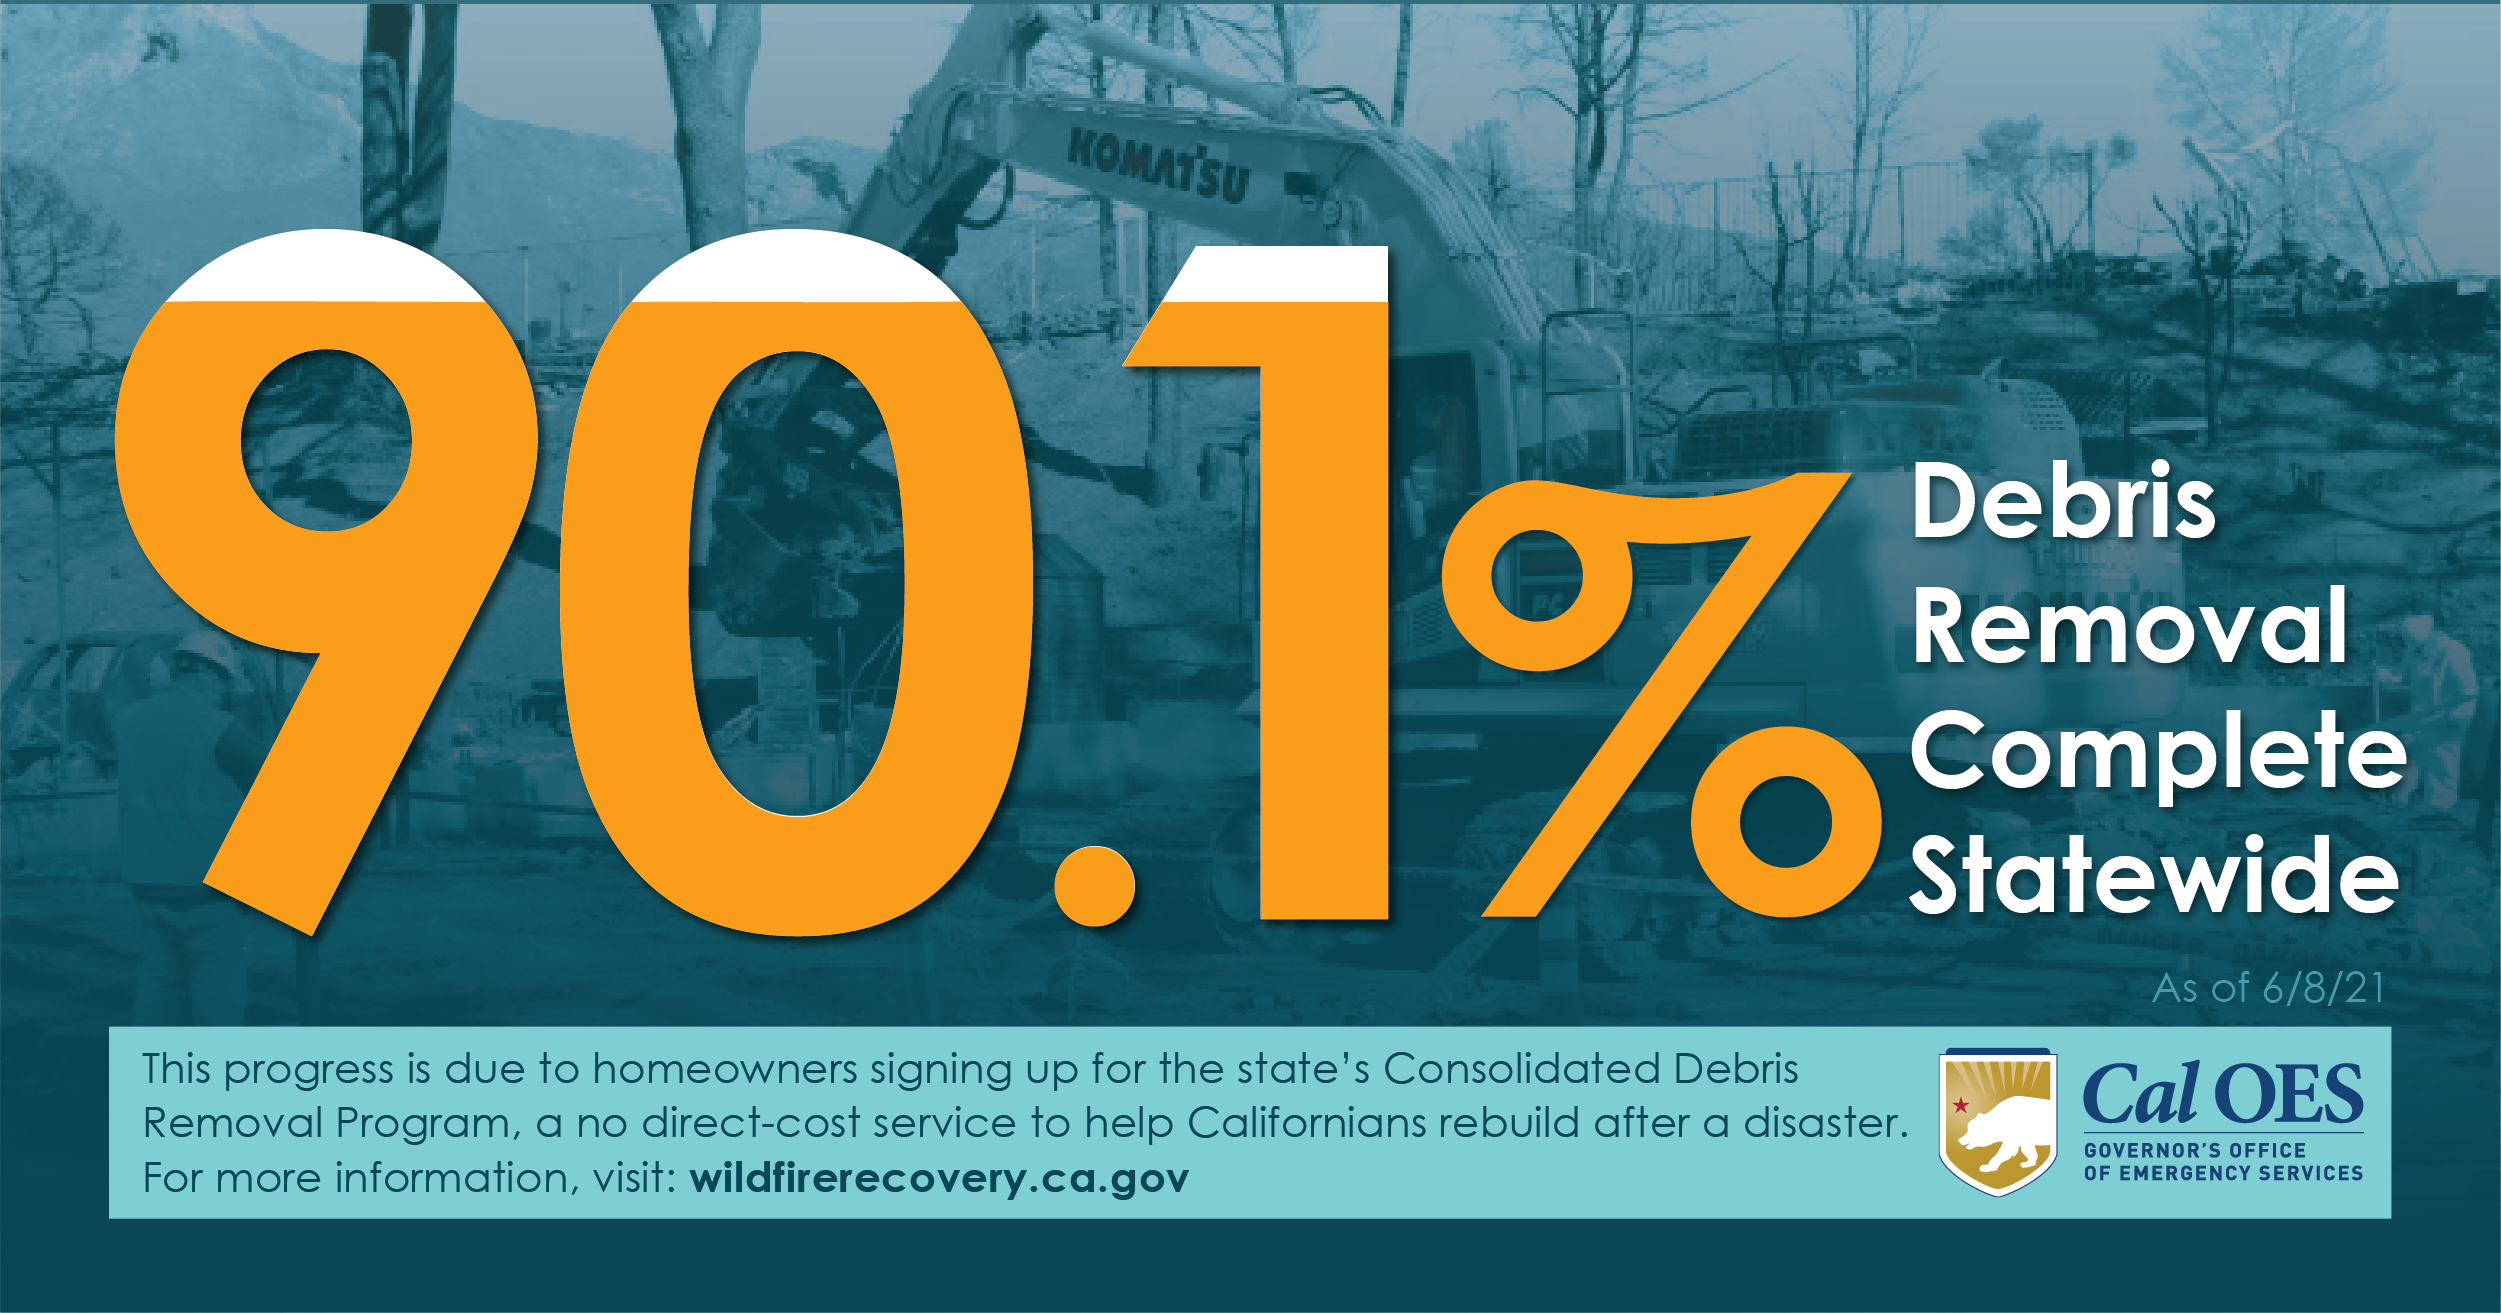 Clearing the Way for Recovery: Statewide Debris Removal Reaches 90% Completion